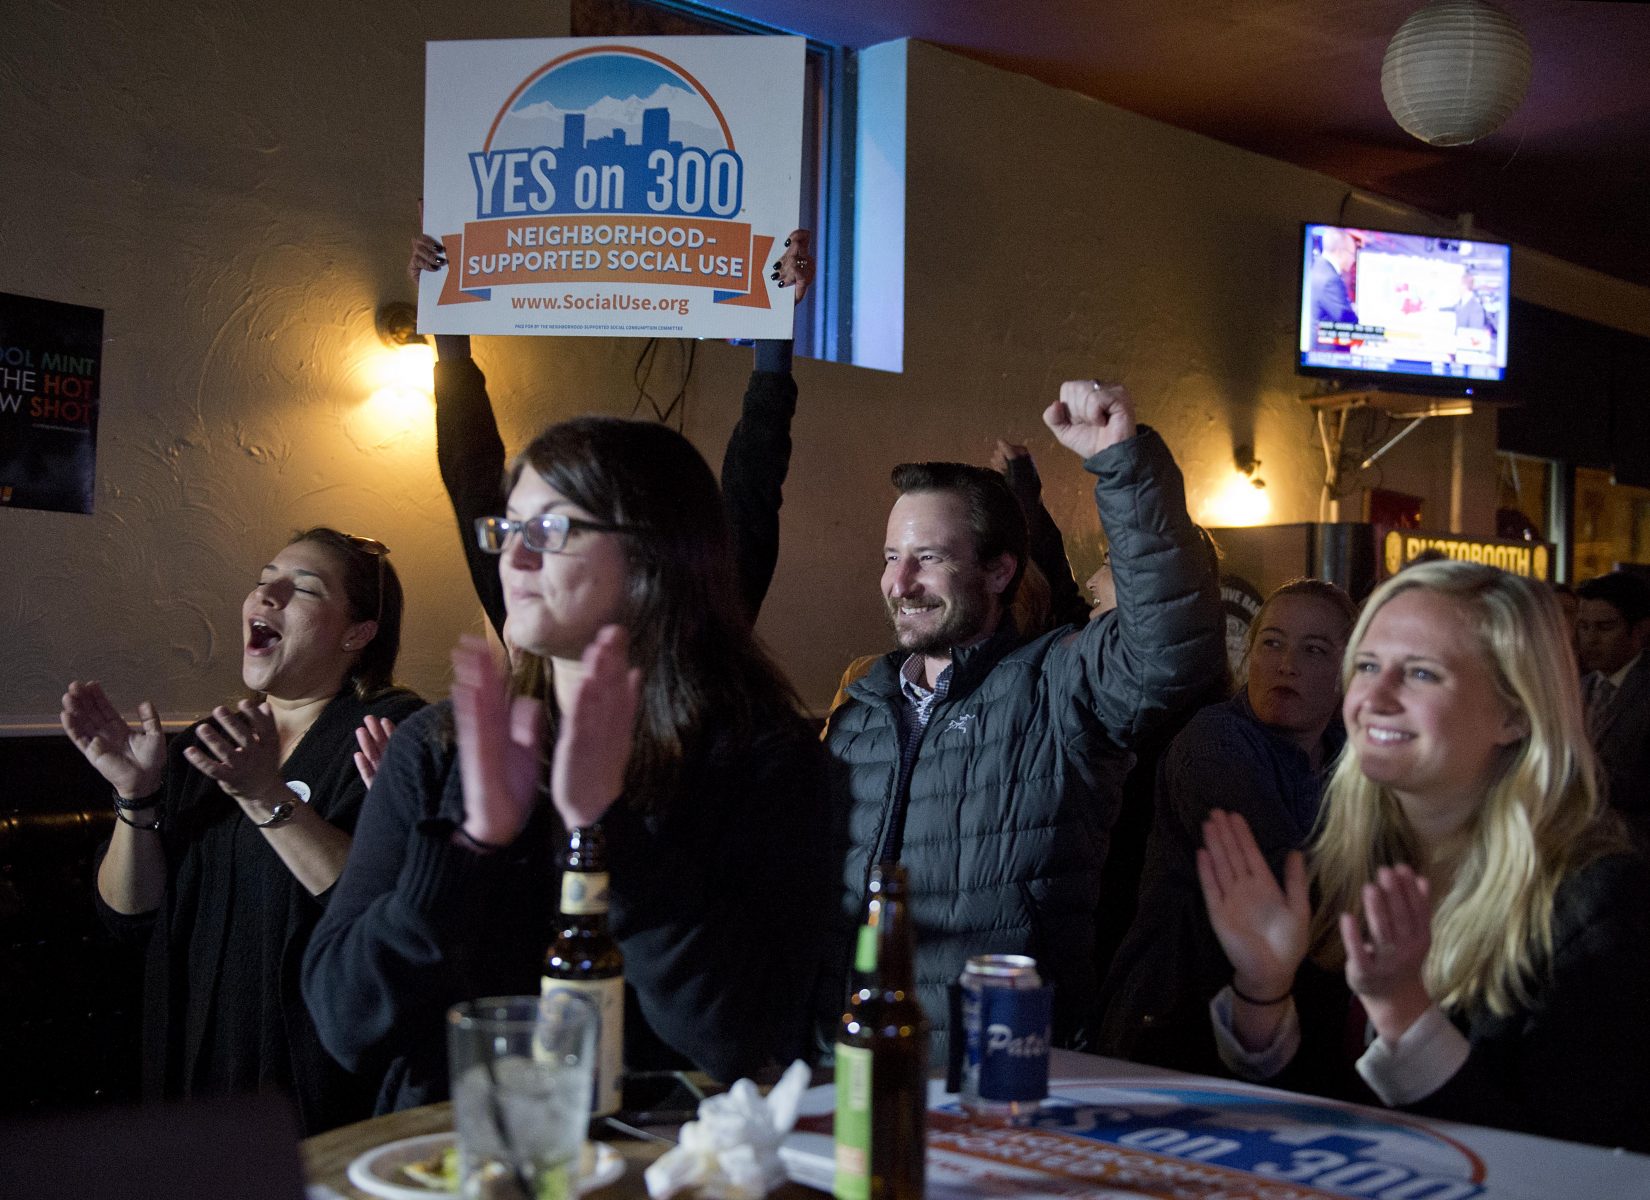 A cheer goes up among supporters of Initiative 300, the Neighborhood-Supported Social Cannabis Consumption Initiative, as they listen to polling updates during an election night watch party at downtown Denver bar El Charrito. (Andy Colwell, The Cannabist)